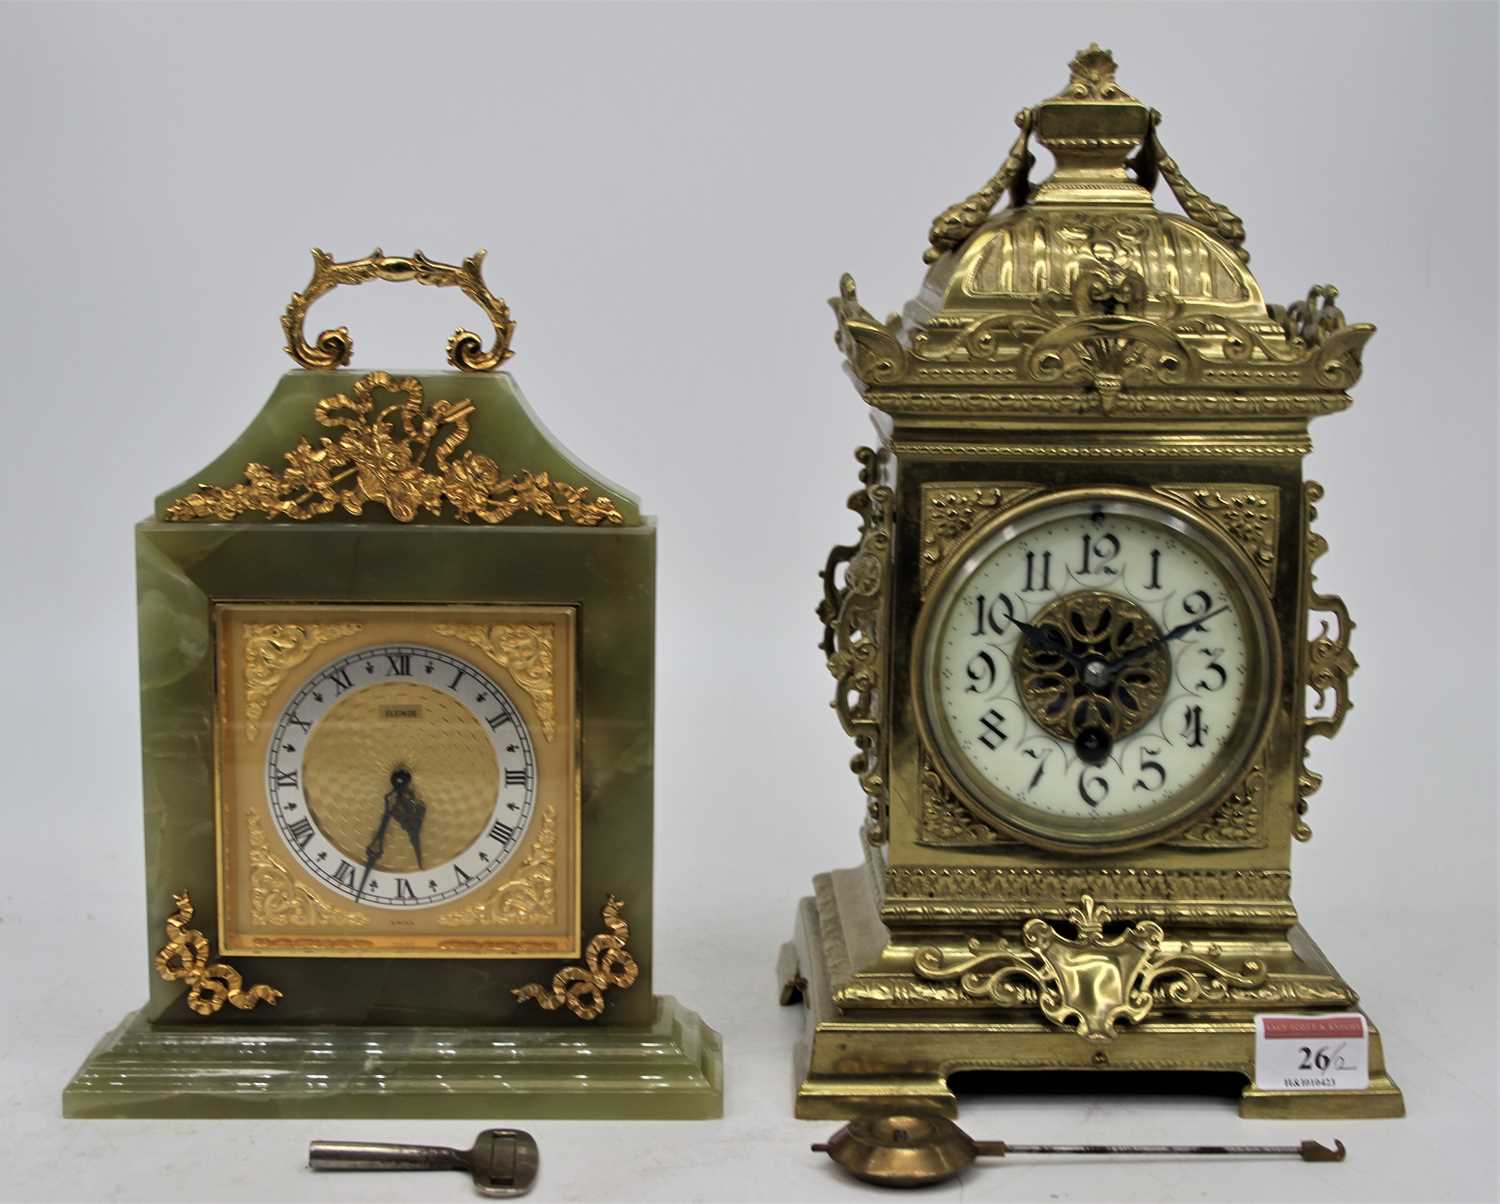 A 19th century brass cased mantel clock having a caddy type top with shell finial, above an